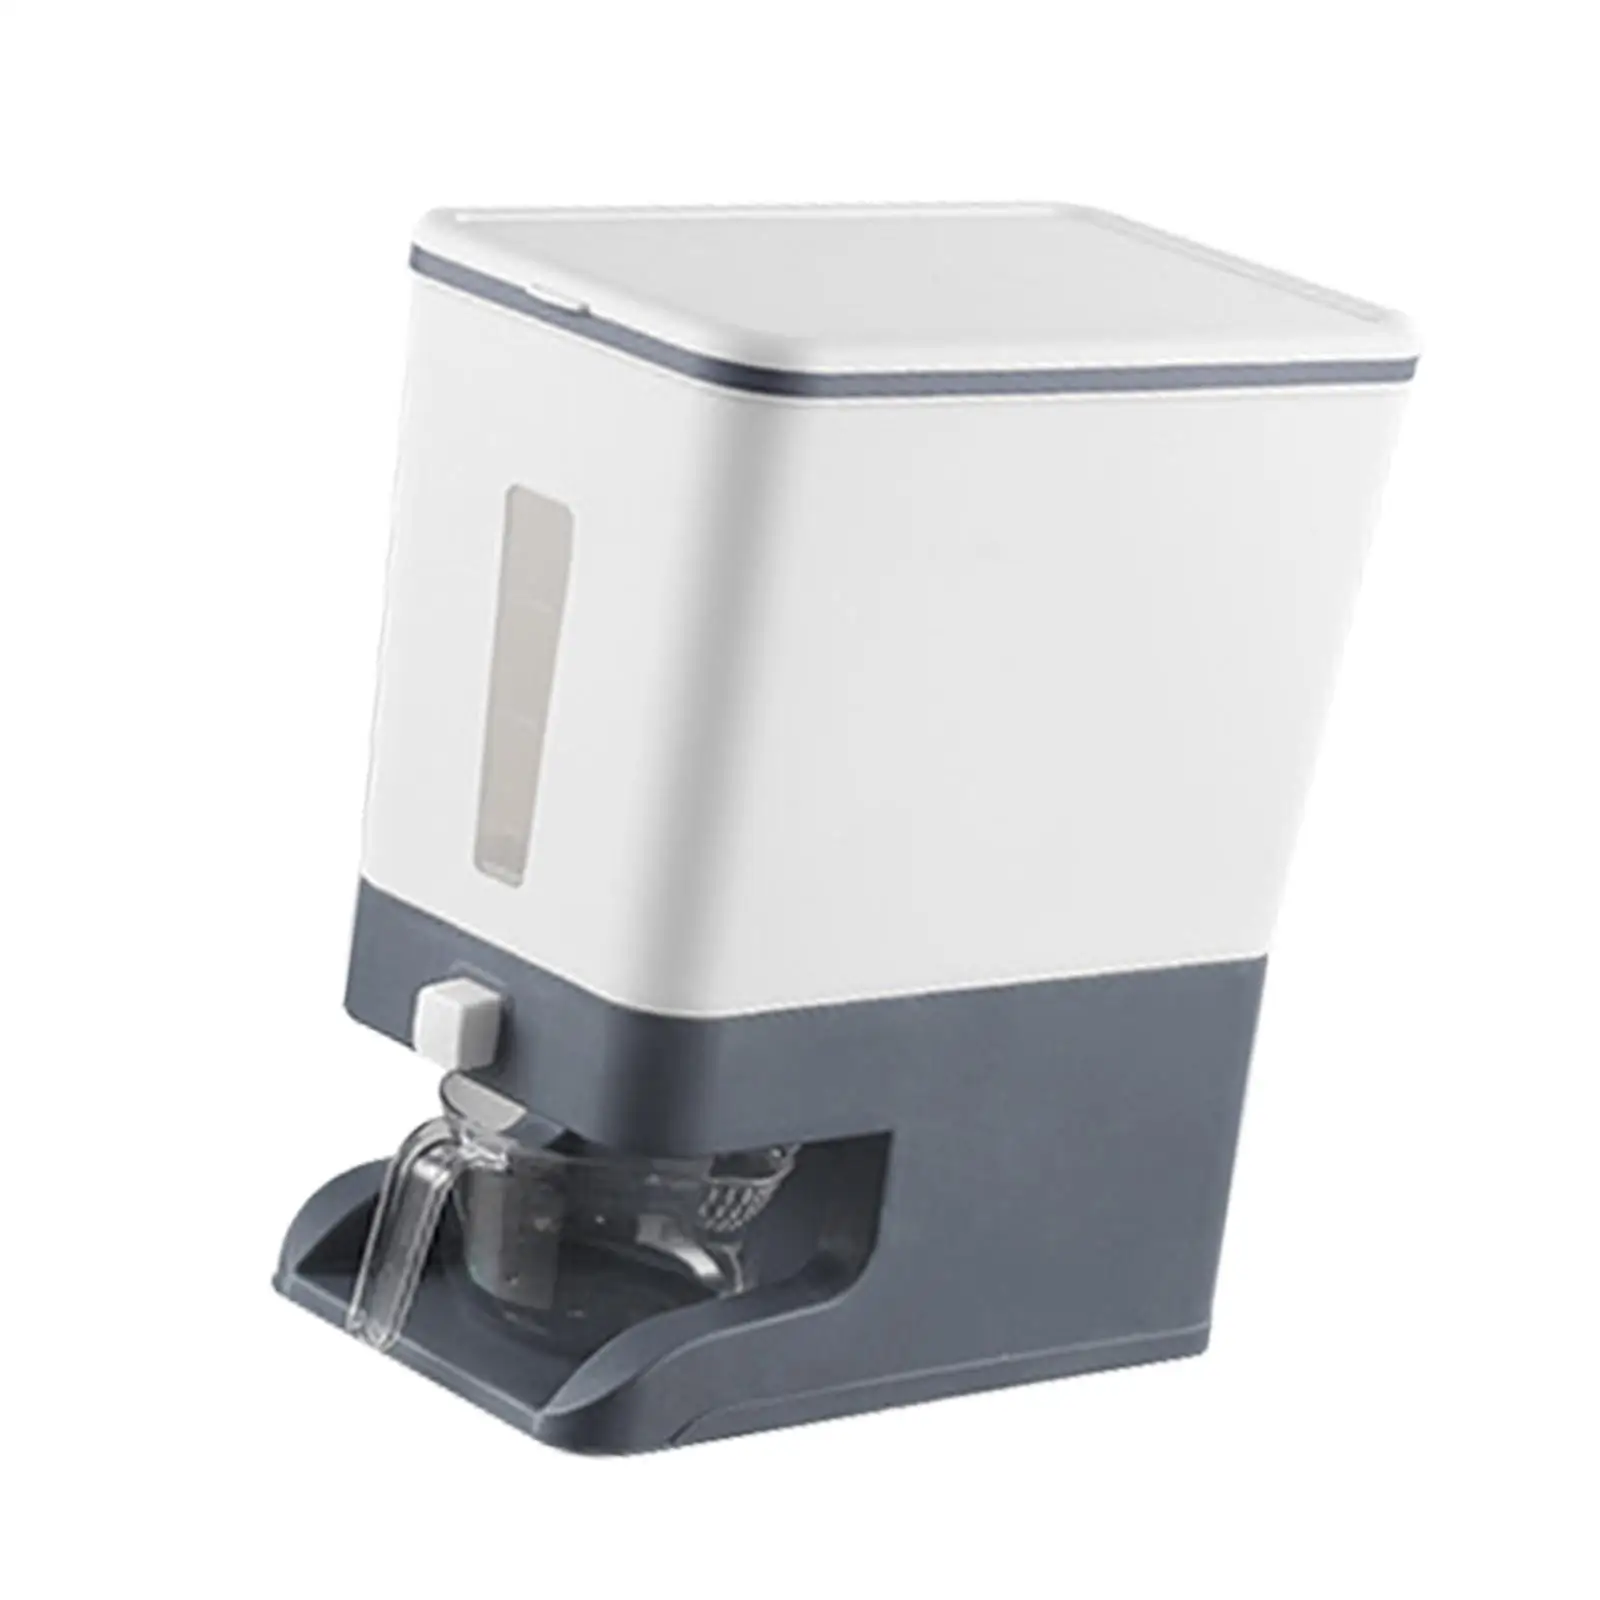 10kg Rice Dispenser Cereal Dispenser Food Container Rice Storage Bin Sealed Lid for Grain Nuts Snacks Rice Beans